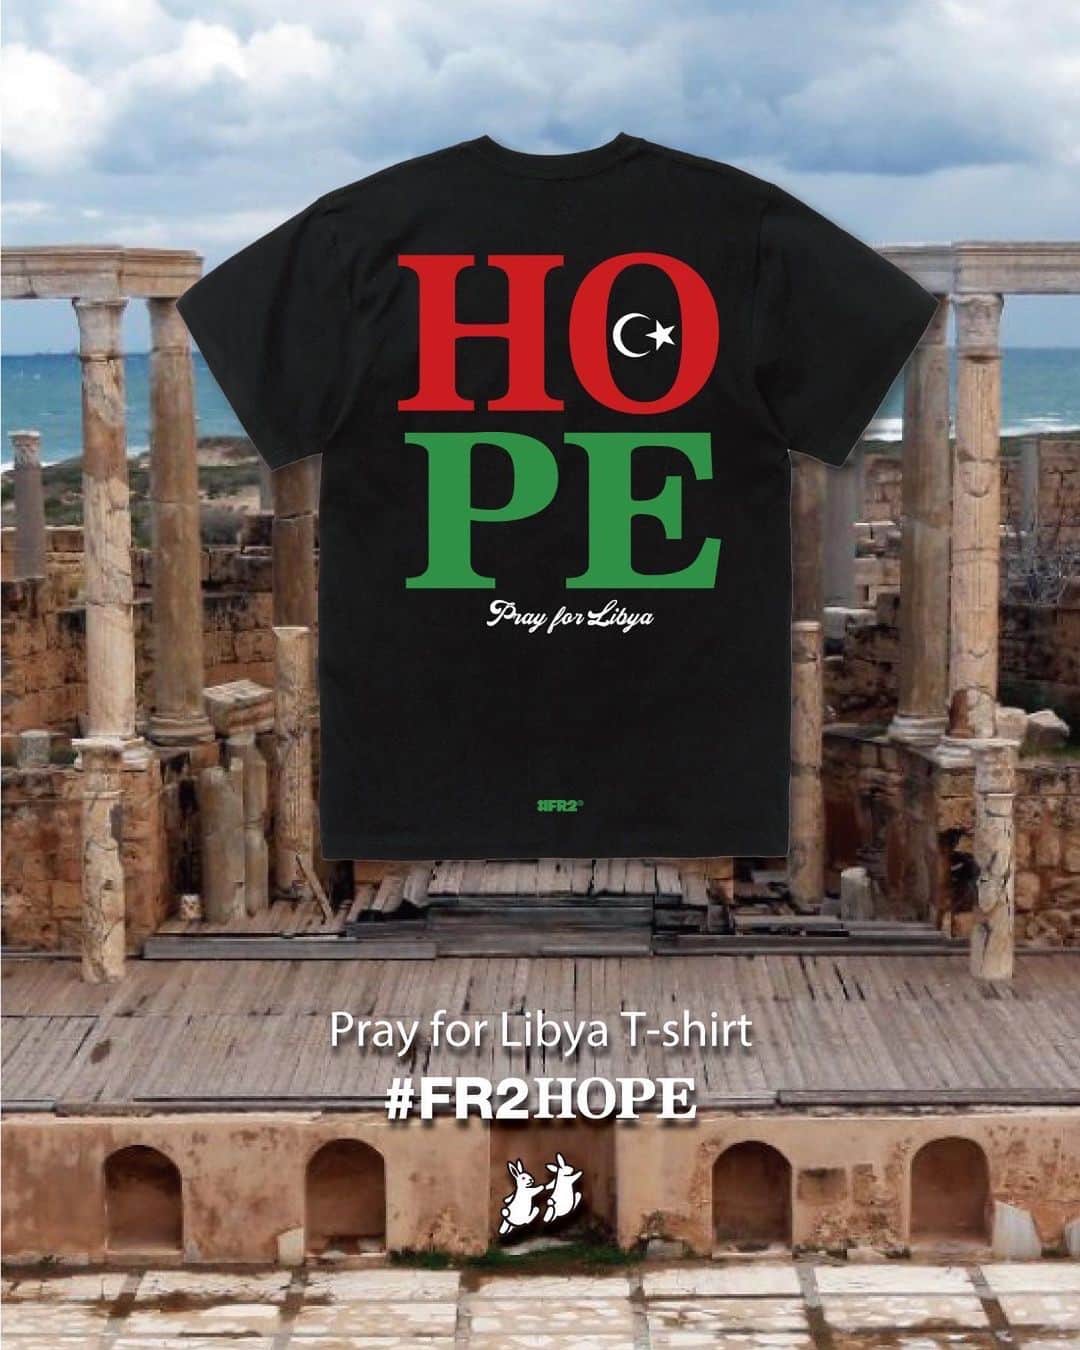 #FR2さんのインスタグラム写真 - (#FR2Instagram)「#FR2Hope As a project, we will provide support for the disaster that occurred in Libya on September 10th. Starting today, we will start accepting orders at the #FR2 Online Store. All proceeds from product sales, minus the costs involved in producing this project, will be donated to the Japanese Red Cross Society.  Starting today, we will start accepting orders at the #FR2 online store. All proceeds from the sales of the low-cost products produced in this project will be donated to the Japanese Red Cross Society.  Order period: September 14th (Thursday) to September 20th (Wednesday), 2023  #FR2希望 プロジェクトとして、9月10日にリビアで発生した災害への支援を行います。 本日から #FR2 Online Storeで受注販売を開始いたします。 こちらの企画の制作にかかわるコストを引いた商品の売上の全ては、日本赤十字社に寄付します。  本日より#FR2オンラインストアで受注販売を開始いたします。 こちらの企画の制作にコストを抑えた商品の売上の全ては、日本赤十字社に寄付します。  受注期間：2023年9月14日（木）～20日（水）  #FR2Hope 作为一个项目，我们将为 9 月 10 日在利比亚发生的灾难提供支持。 从今天开始，我们将开始在 #FR2 在线商店接受订单。 产品销售的所有收益，减去制作该项目所涉及的成本，将捐赠给日本红十字会。  从今天开始，我们将开始在 #FR2 在线商店接受订单。 该项目生产的低成本产品的销售收入将全部捐赠给日本红十字会。  订购期间：2023年9月14日（星期四）至9月20日（星期三）  #FR2Hope 作為一個項目，我們將為 9 月 10 日在利比亞發生的災難提供支持。 從今天開始，我們將開始在 #FR2 在線商店接受訂單。 產品銷售的所有收益，減去製作該項目所涉及的成本，將捐贈給日本紅十字會。  從今天開始，我們將開始在 #FR2 在線商店接受訂單。 該項目生產的低成本產品的銷售收入將全部捐贈給日本紅十字會。  訂購期間：2023年9月14日（星期四）至9月20日（星期三）  #FR2希望　#FR2HOPE」9月14日 19時43分 - fxxkingrabbits